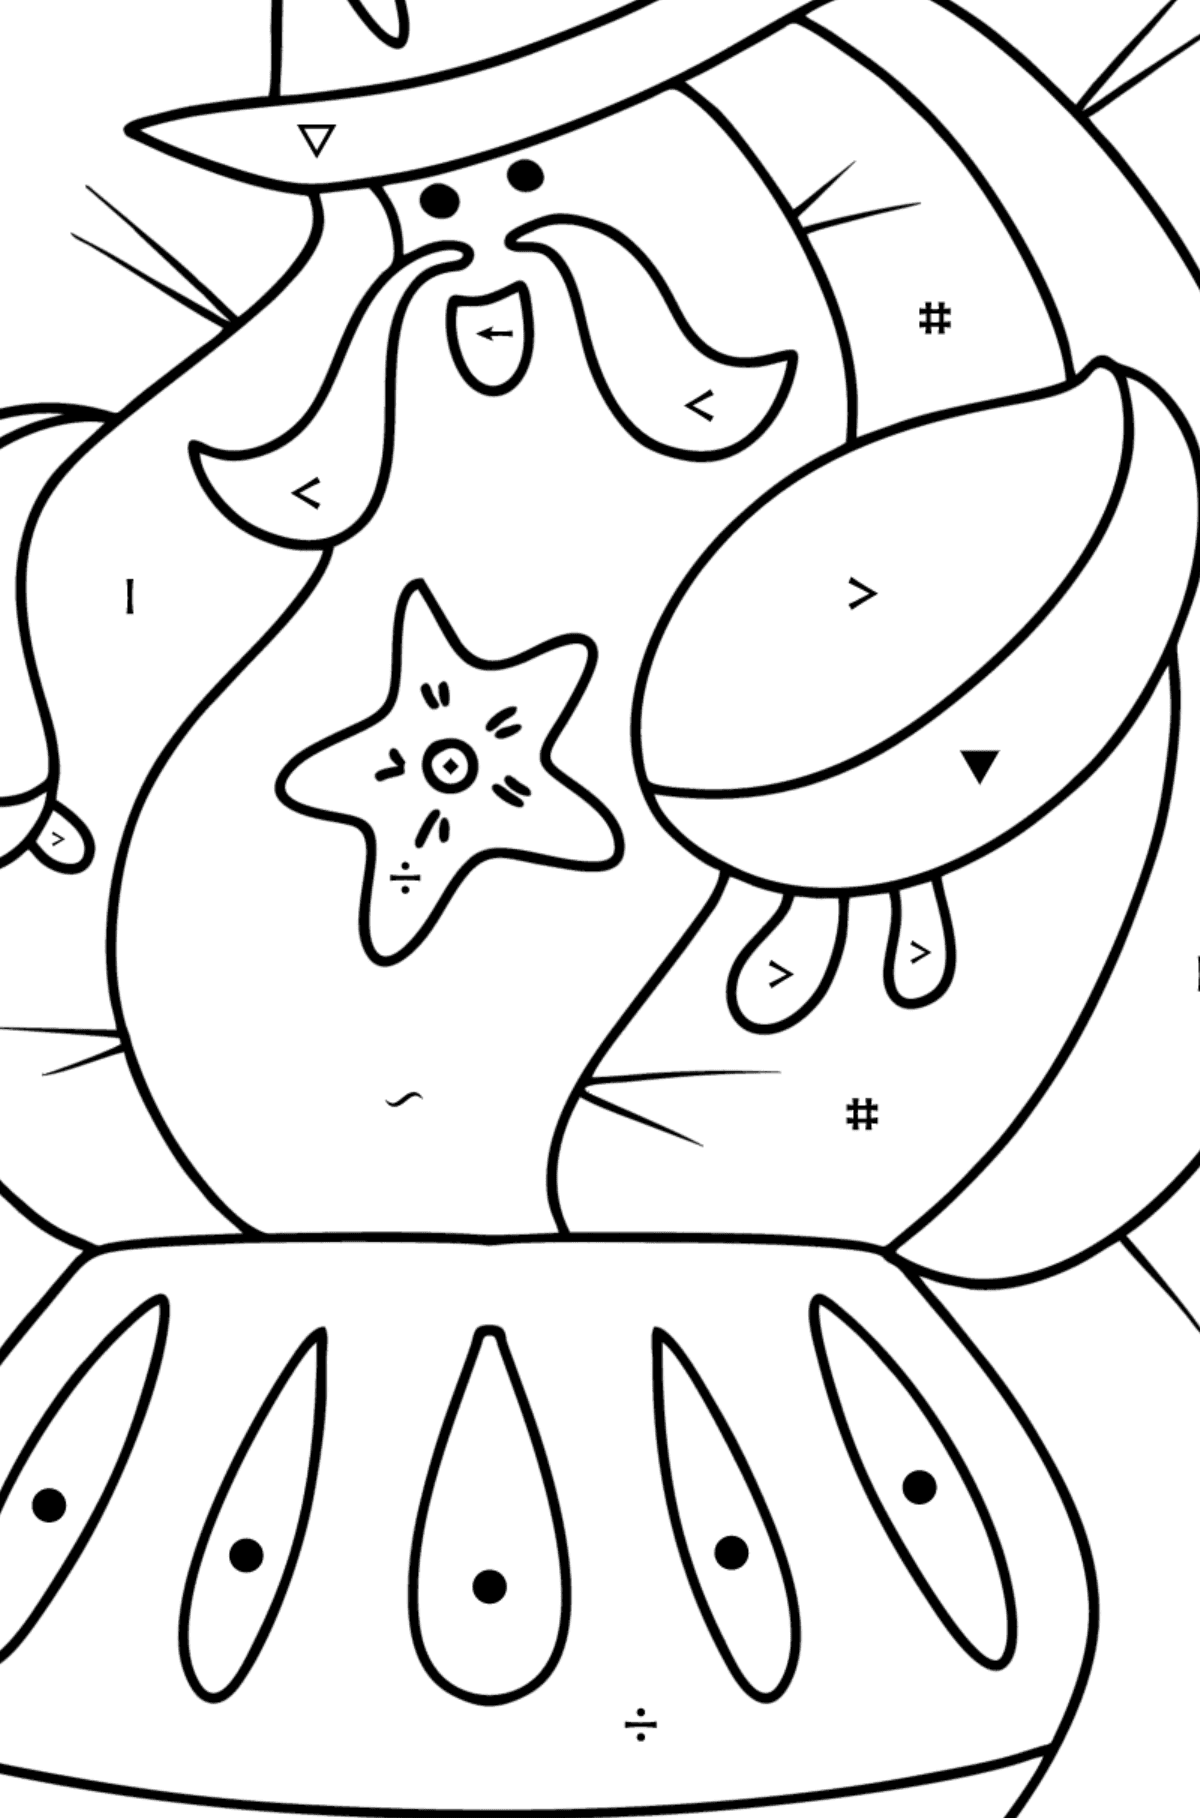 Sheriff Cactus coloring page - Coloring by Symbols for Kids